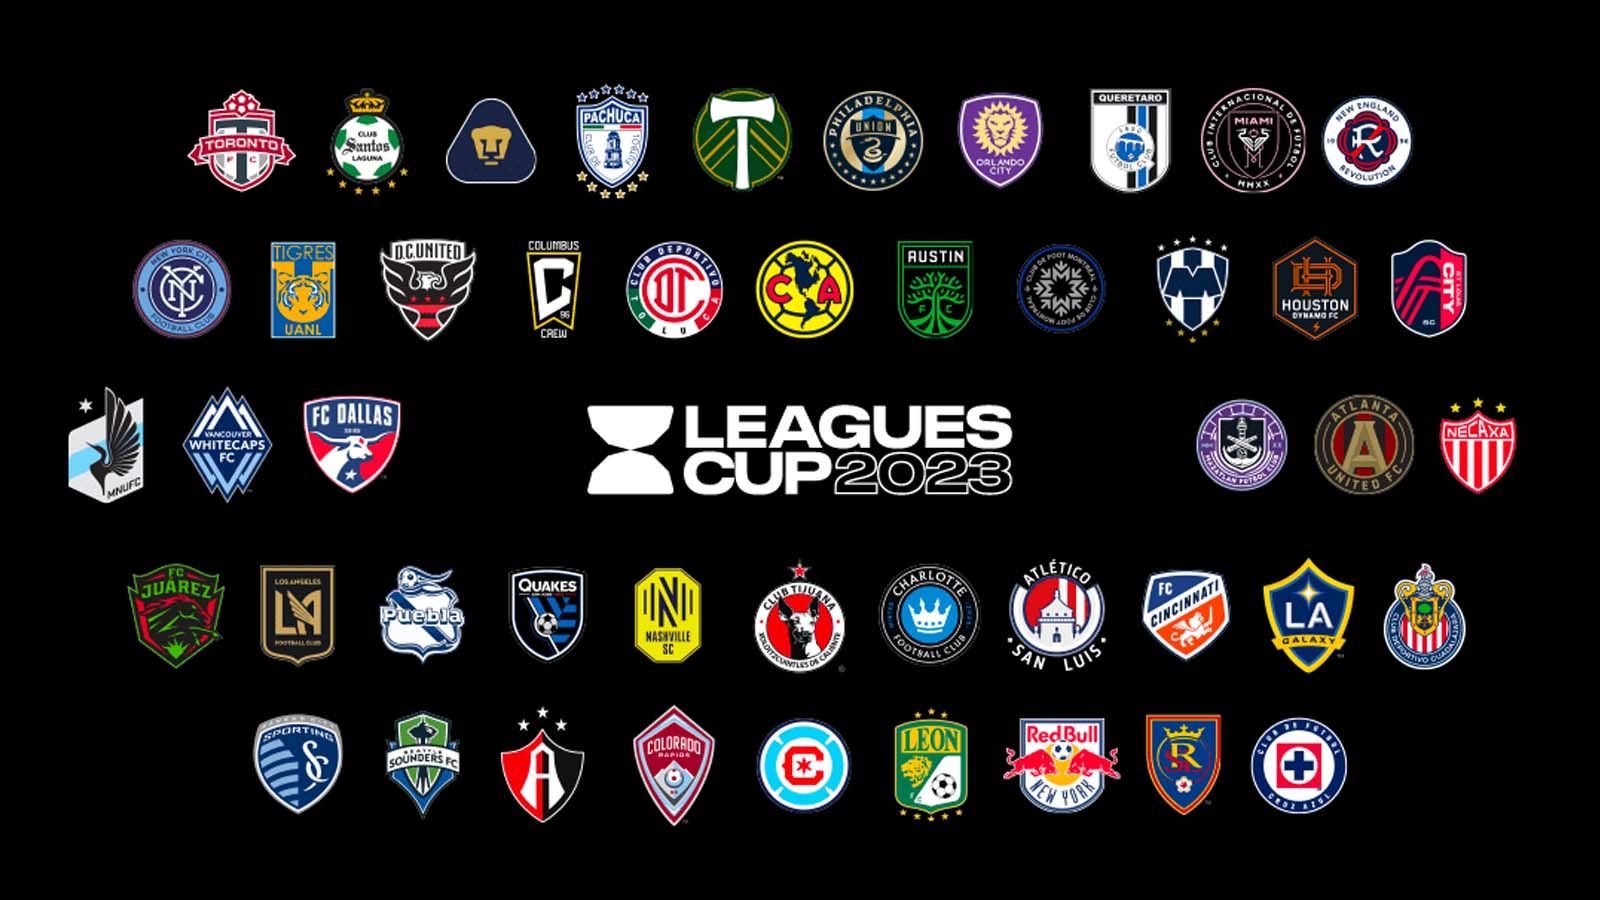 Groups for 2023 Leagues Cup announced